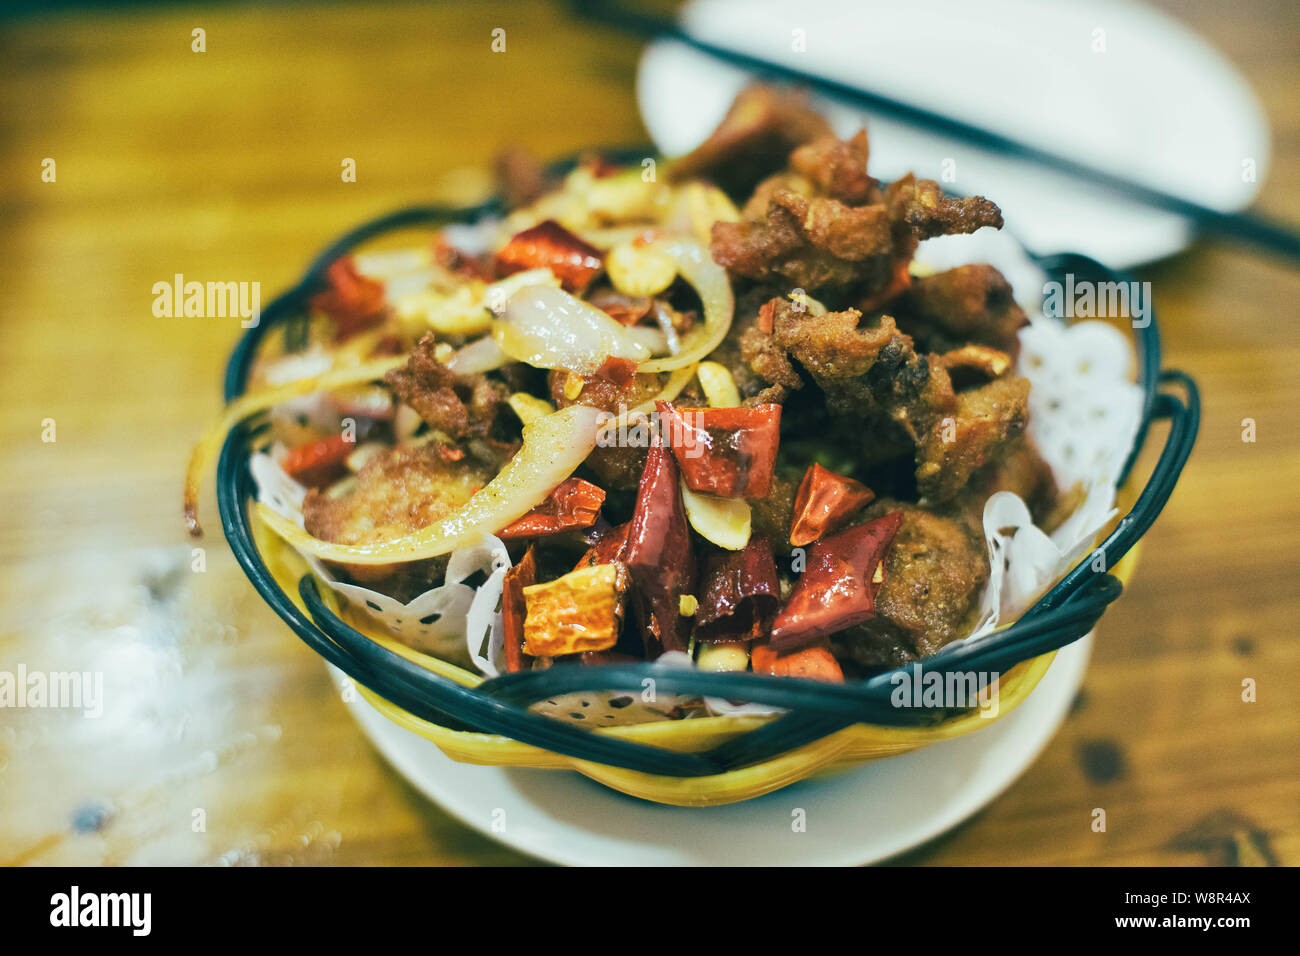 Sichuan spicy fried chicken cube, a common dish in china restaurant. Stock Photo